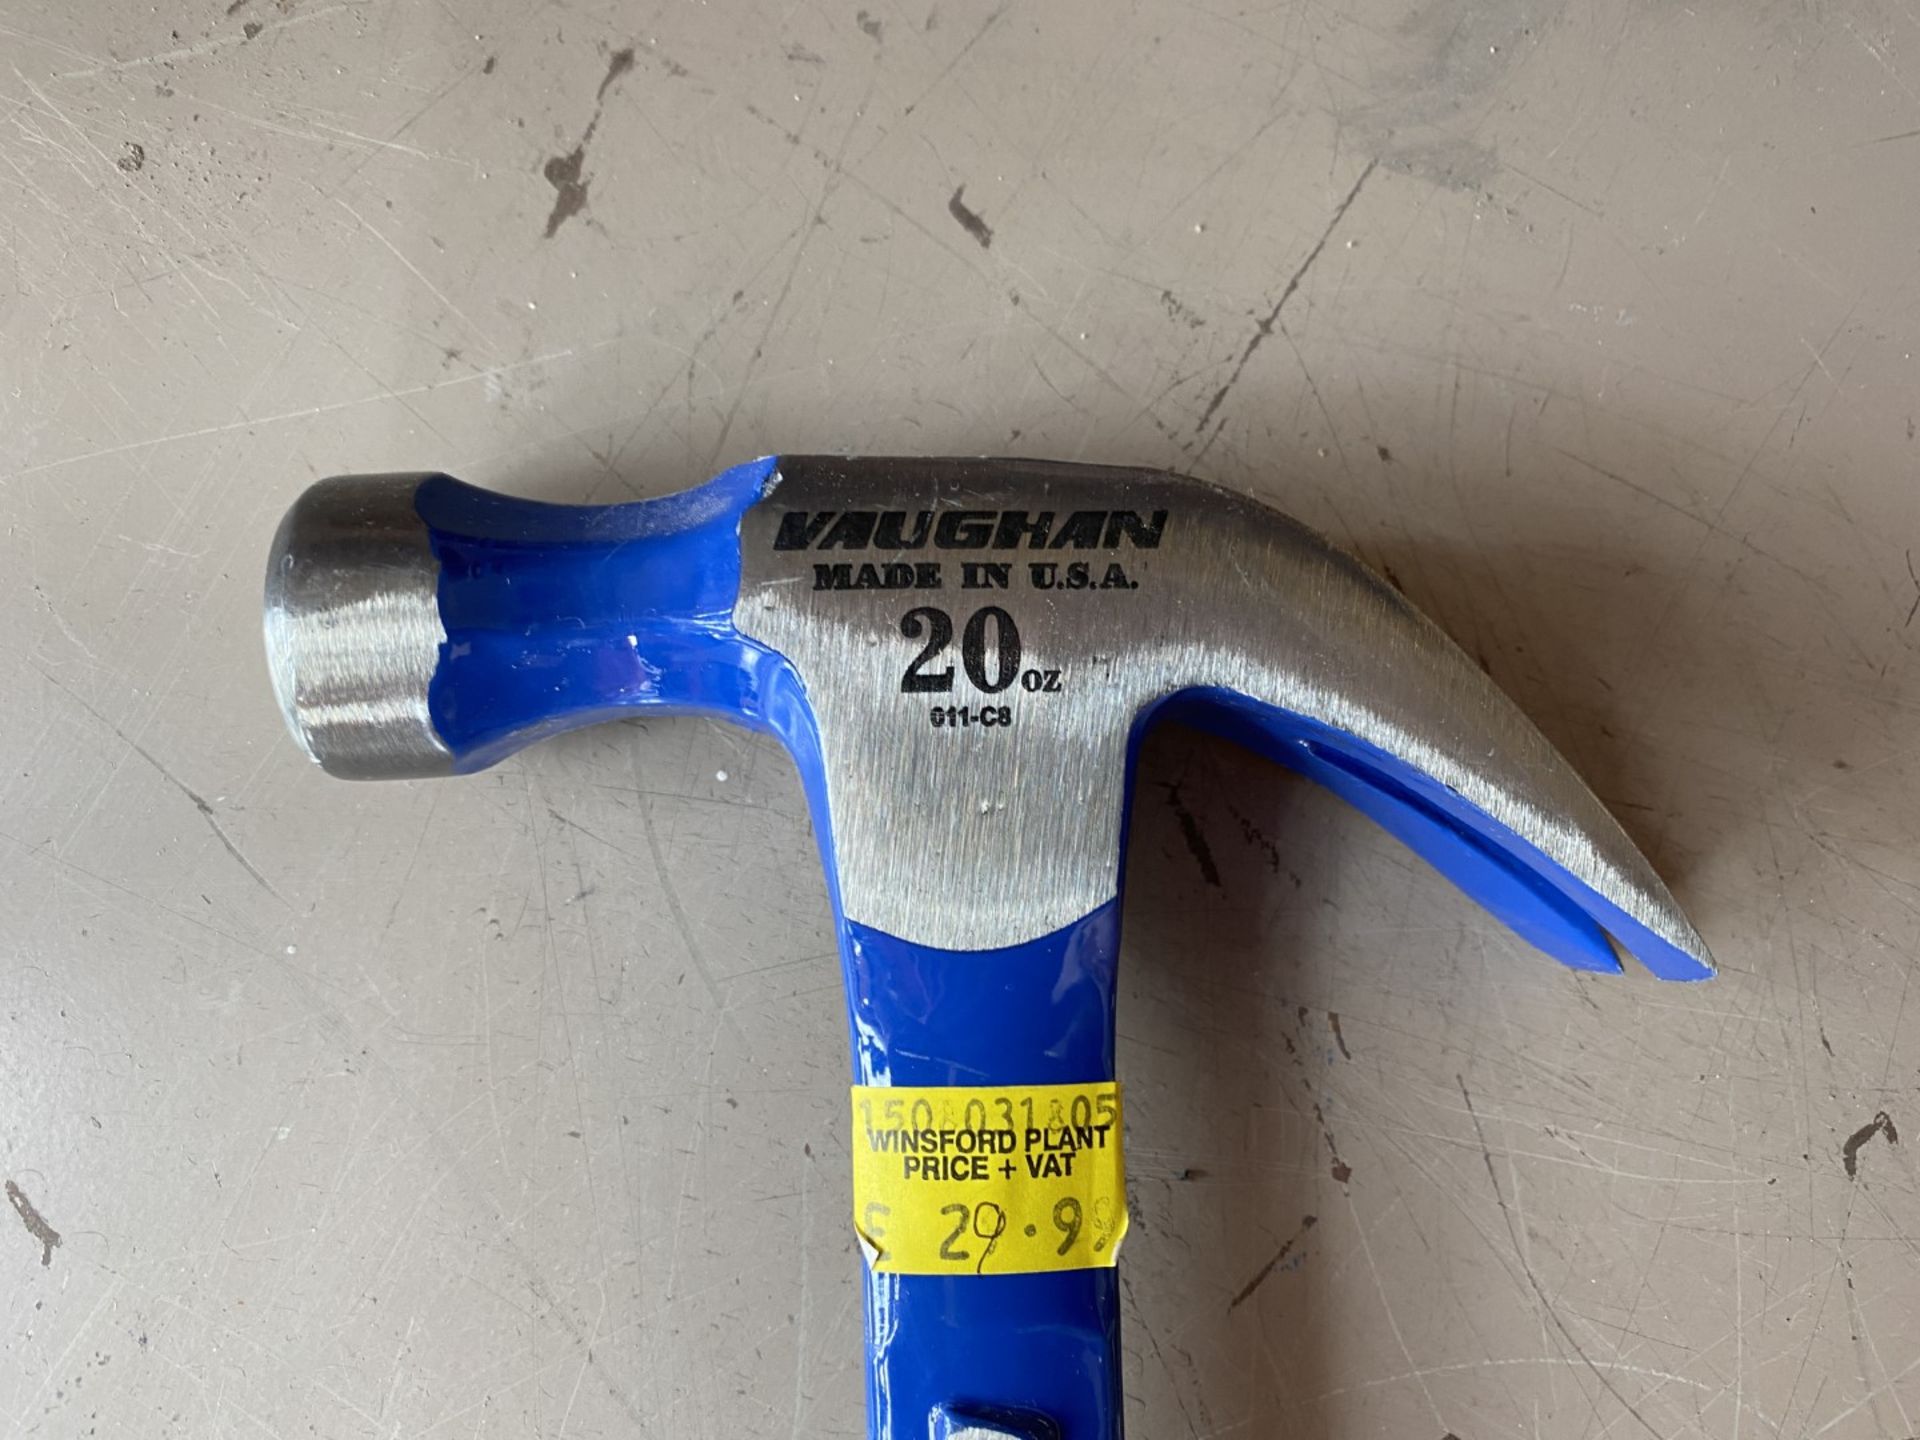 NEW Vaughan curved claw hammer, RRP £29.99 - Image 2 of 2